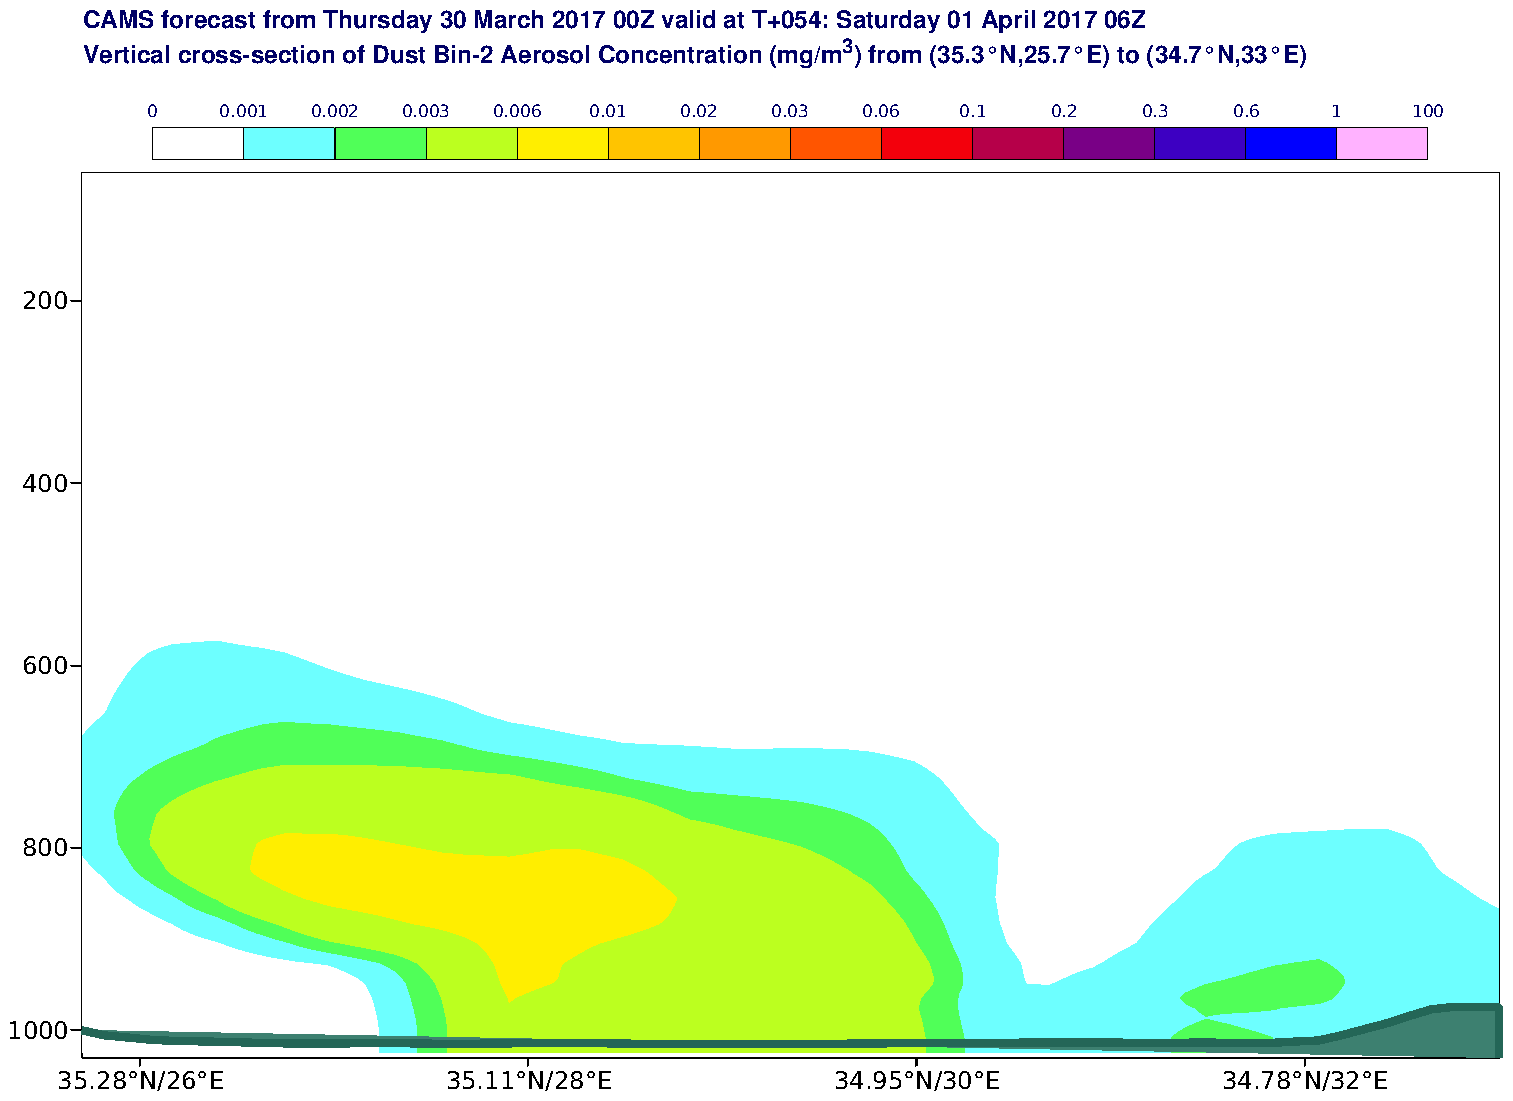 Vertical cross-section of Dust Bin-2 Aerosol Concentration (mg/m3) valid at T54 - 2017-04-01 06:00